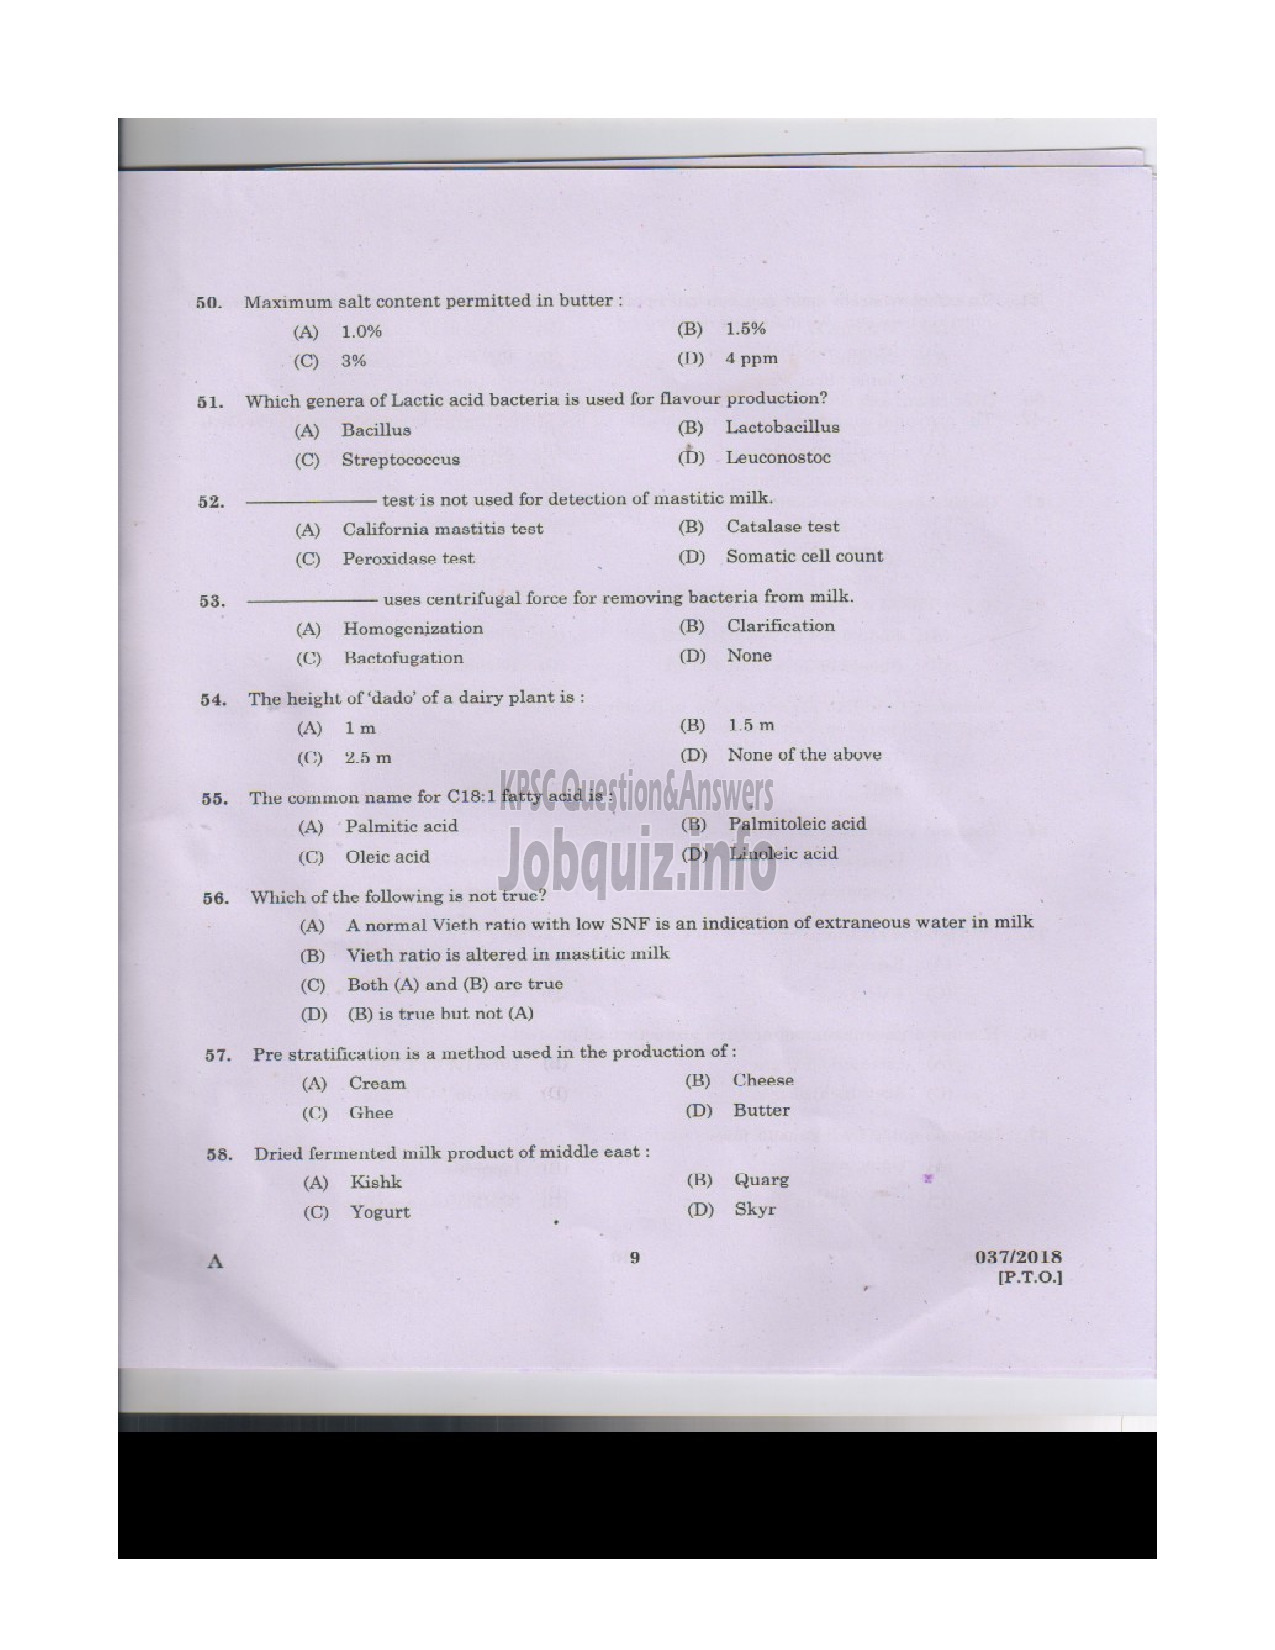 Kerala PSC Question Paper - VOCATIONAL INSTRUCTOR IN DAIRYING MILK PRODUCTS VHSE-8